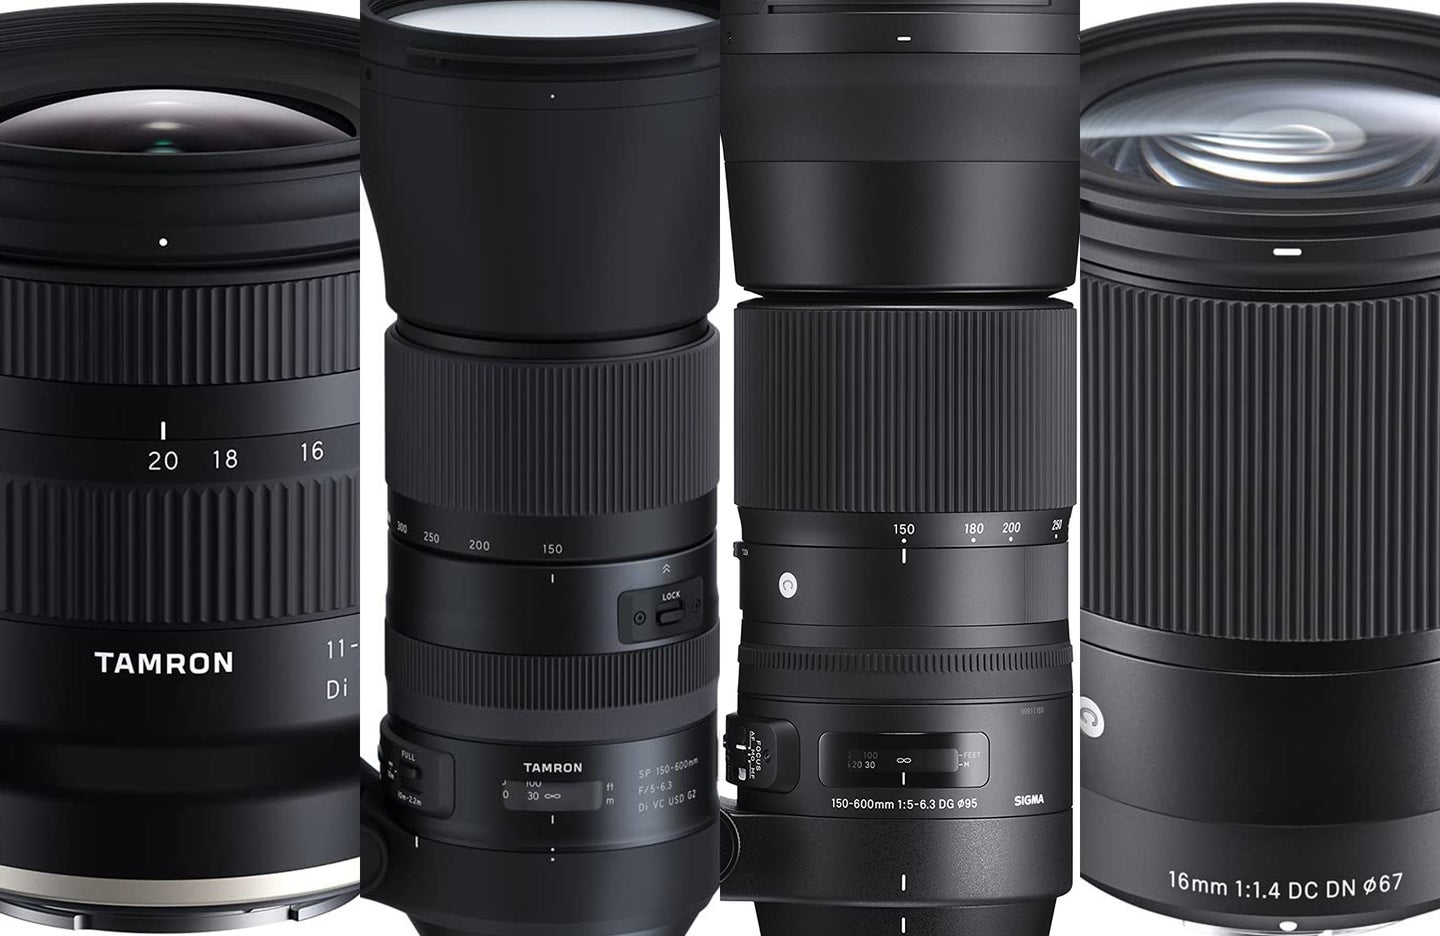 Save on Tamron and Sigma lenses during this early Black Friday sale.